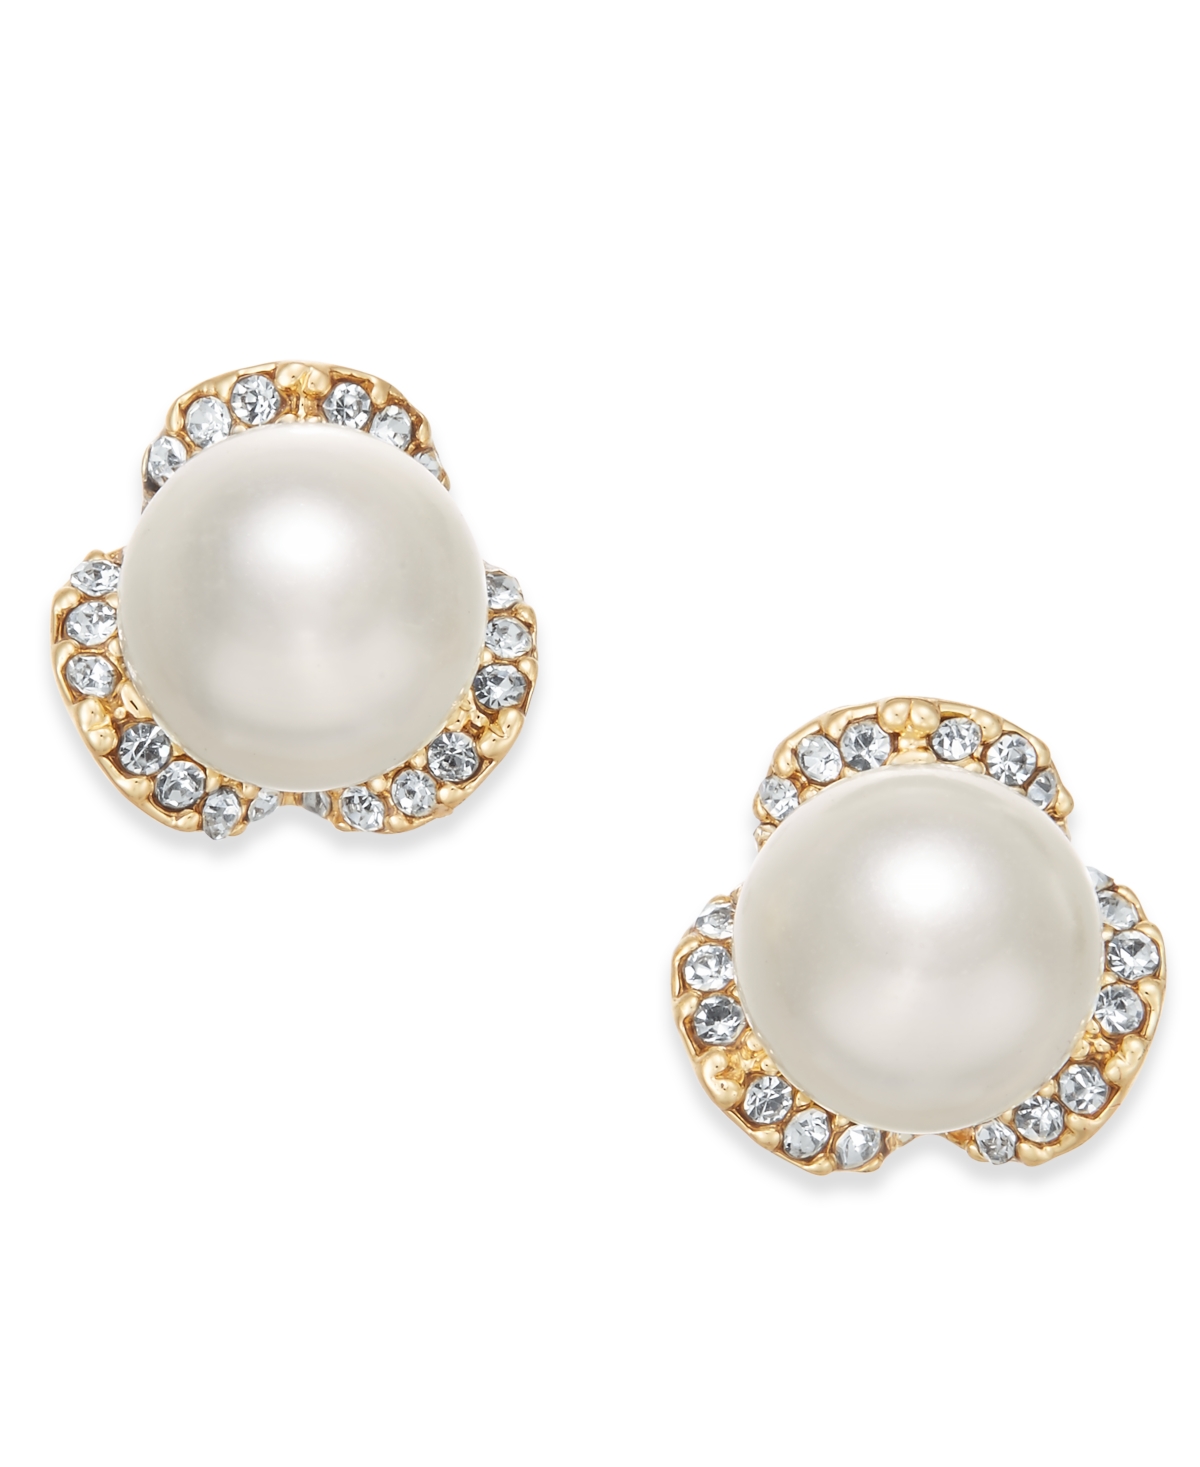 Imitation Pearl & Pave Stud Earrings, Created for Macy's - Gold